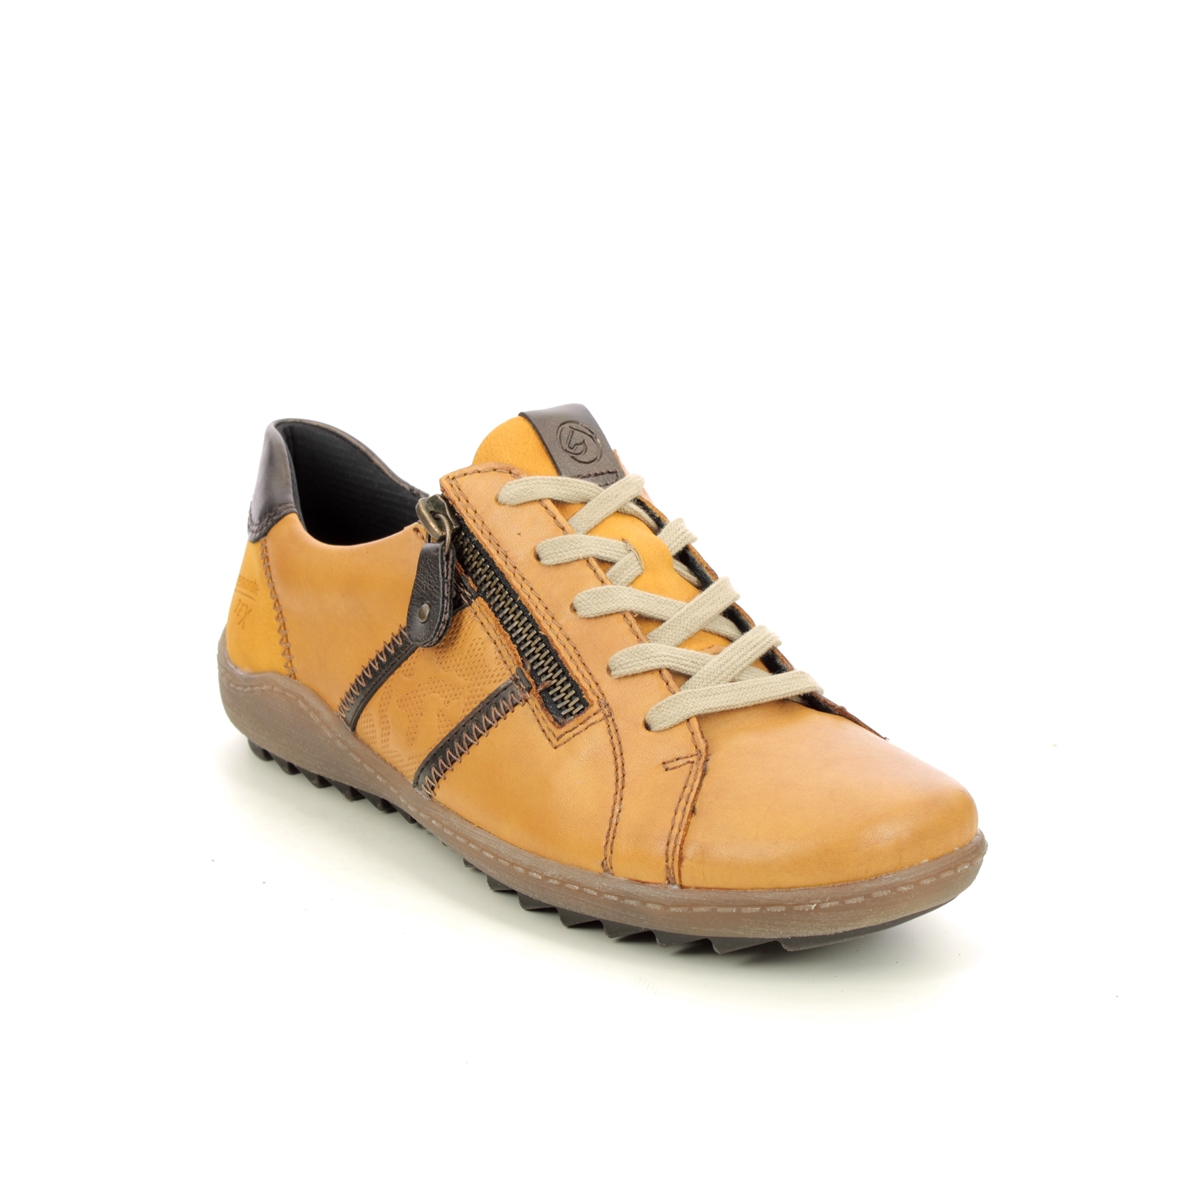 Remonte Zigspo Tex 15 Yellow Womens Lacing Shoes R1426-69 In Size 40 In Plain Yellow